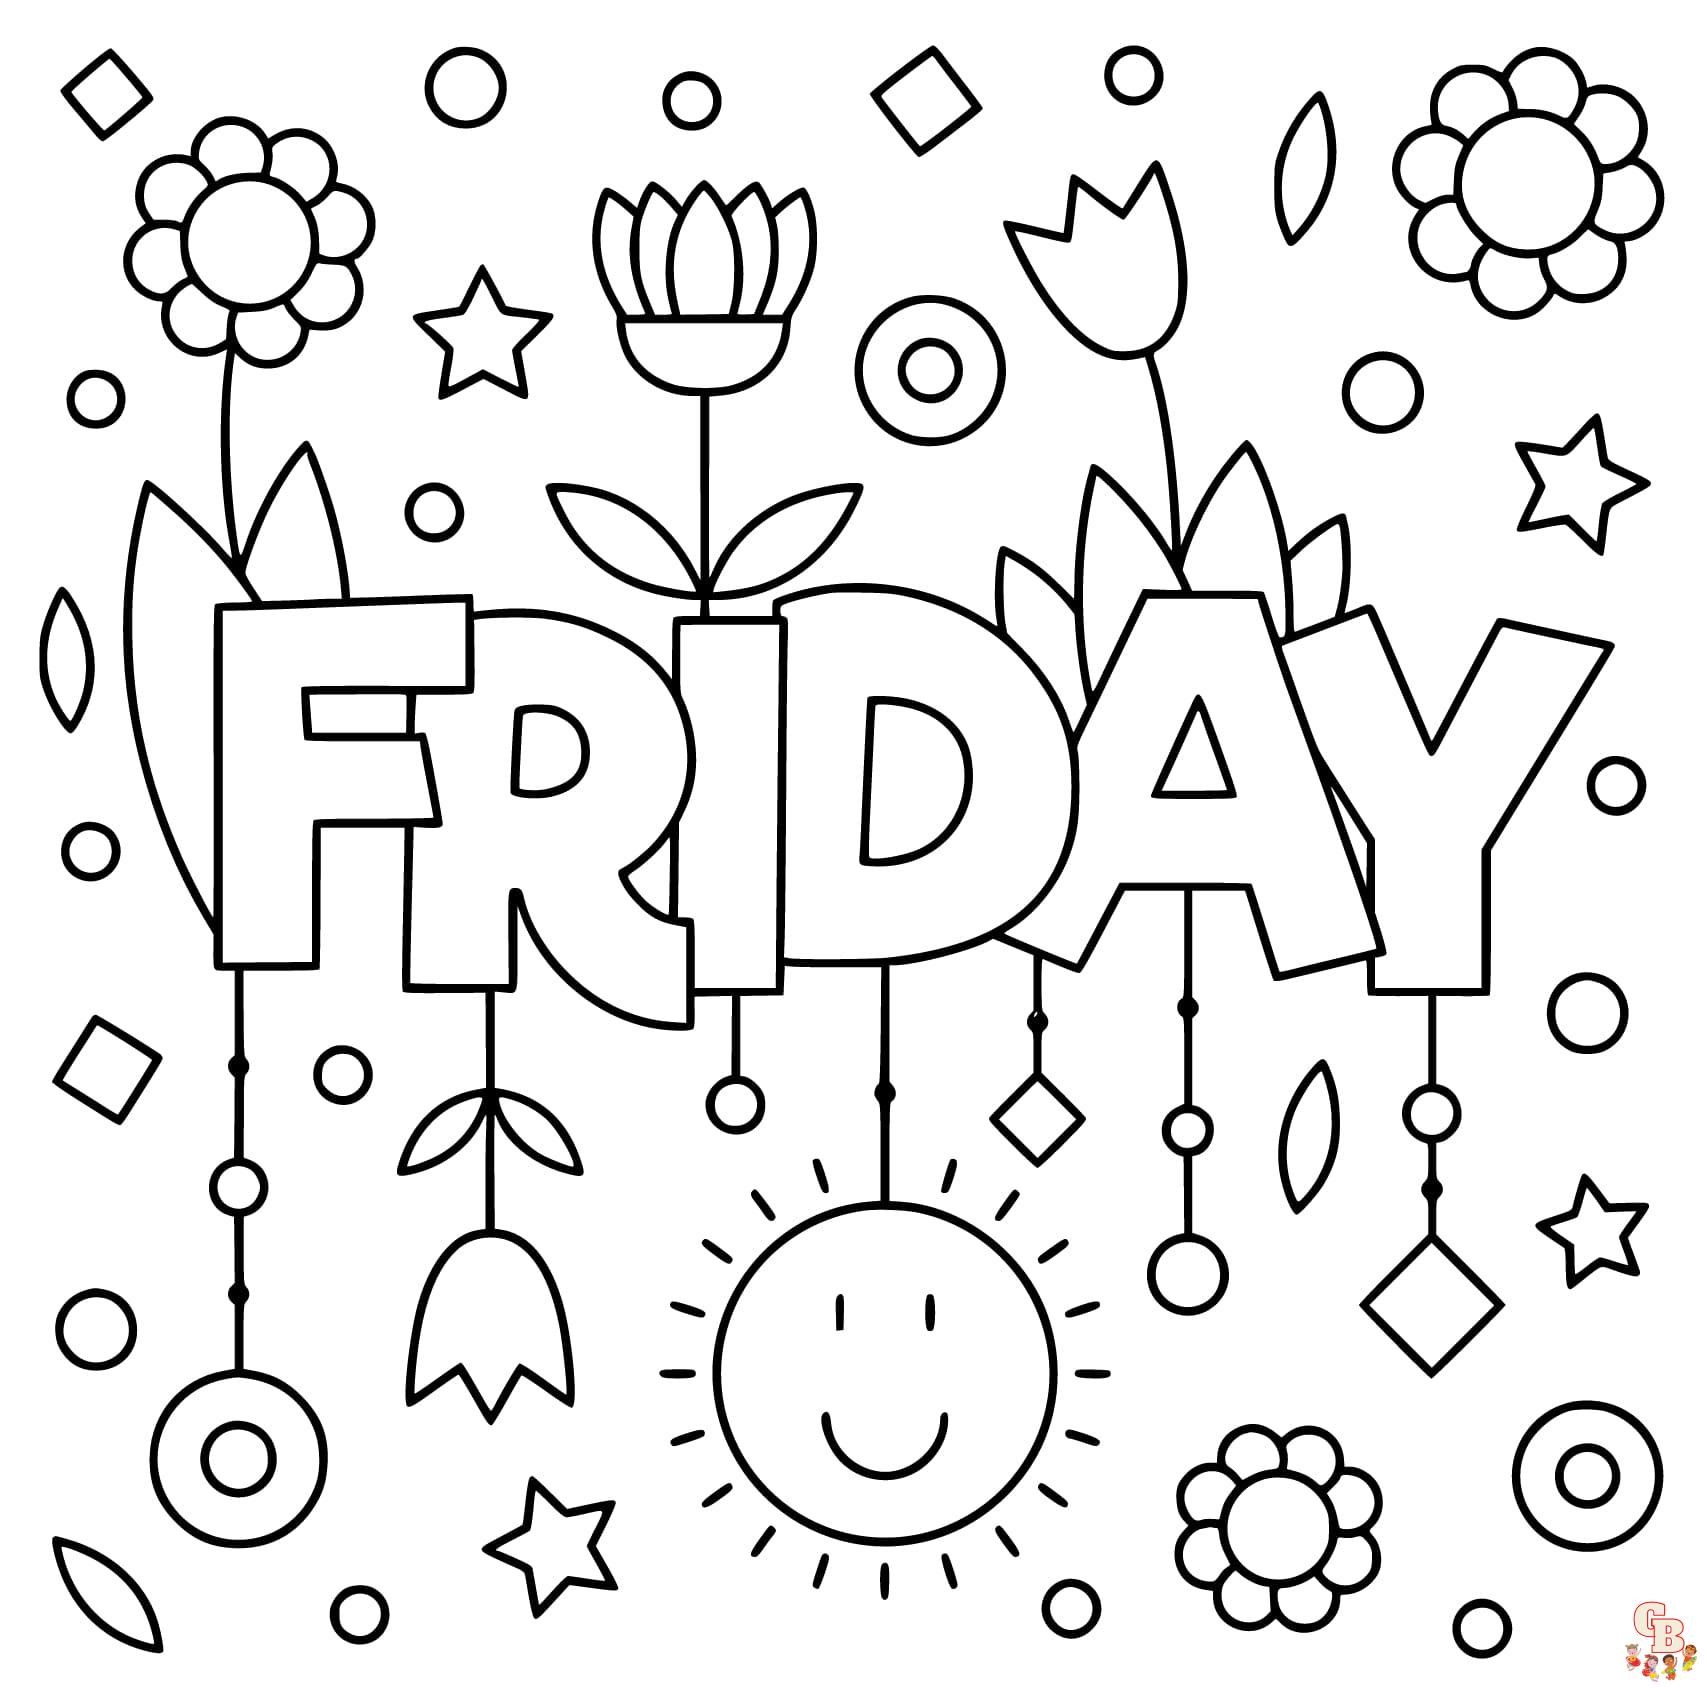 Friaday coloring pages printable